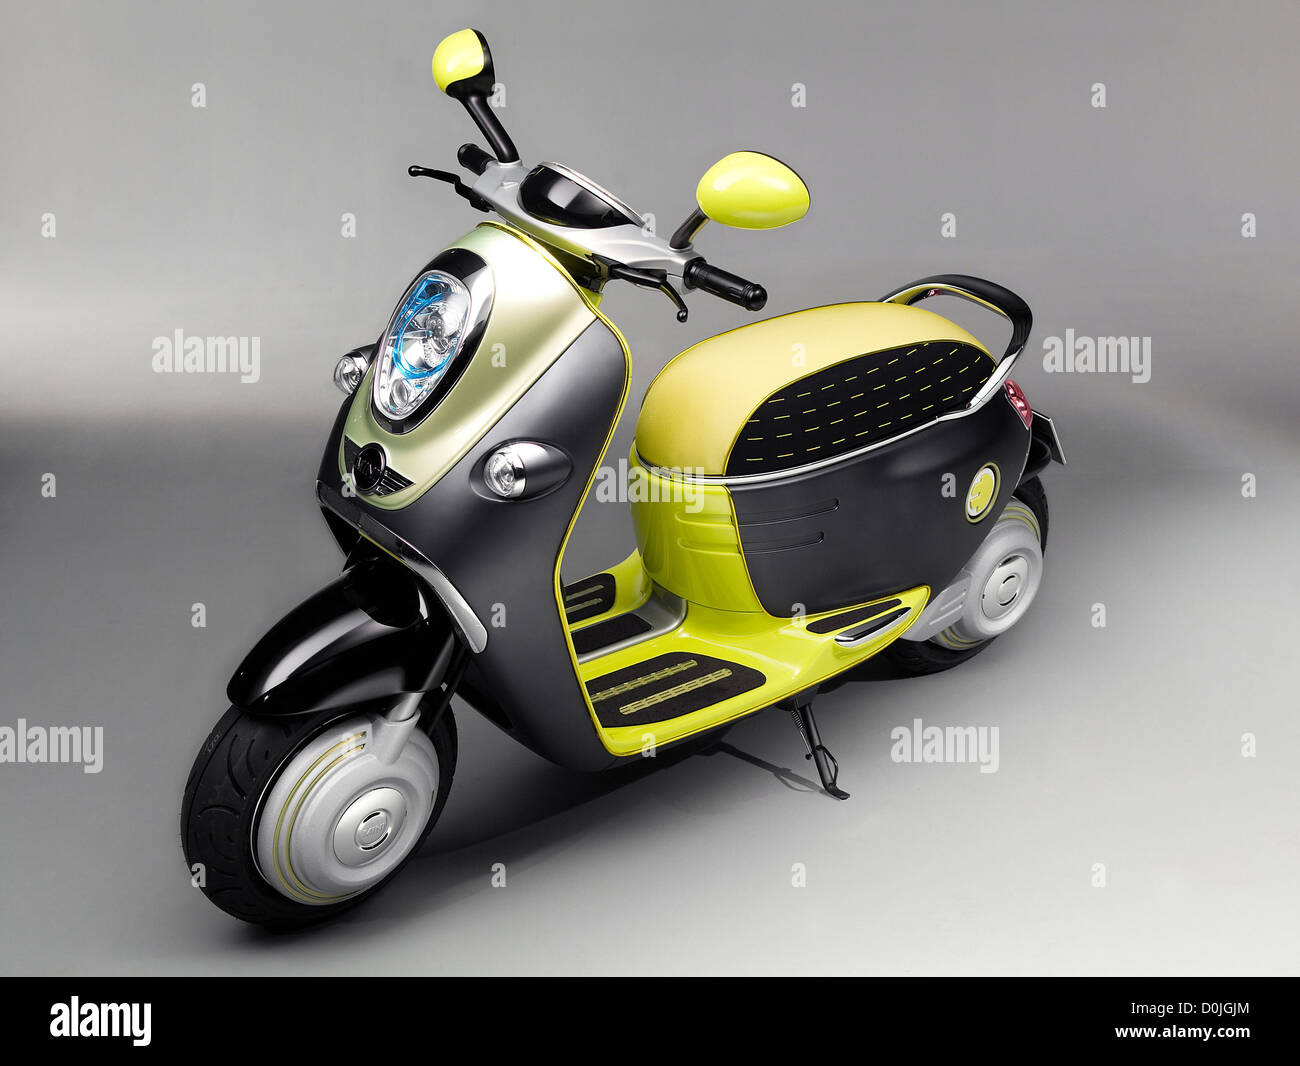 The MINI downsizes with electric scooter The future of the MINI is taking a turn on two wheelsengineers have unveiled a new Stock Photo